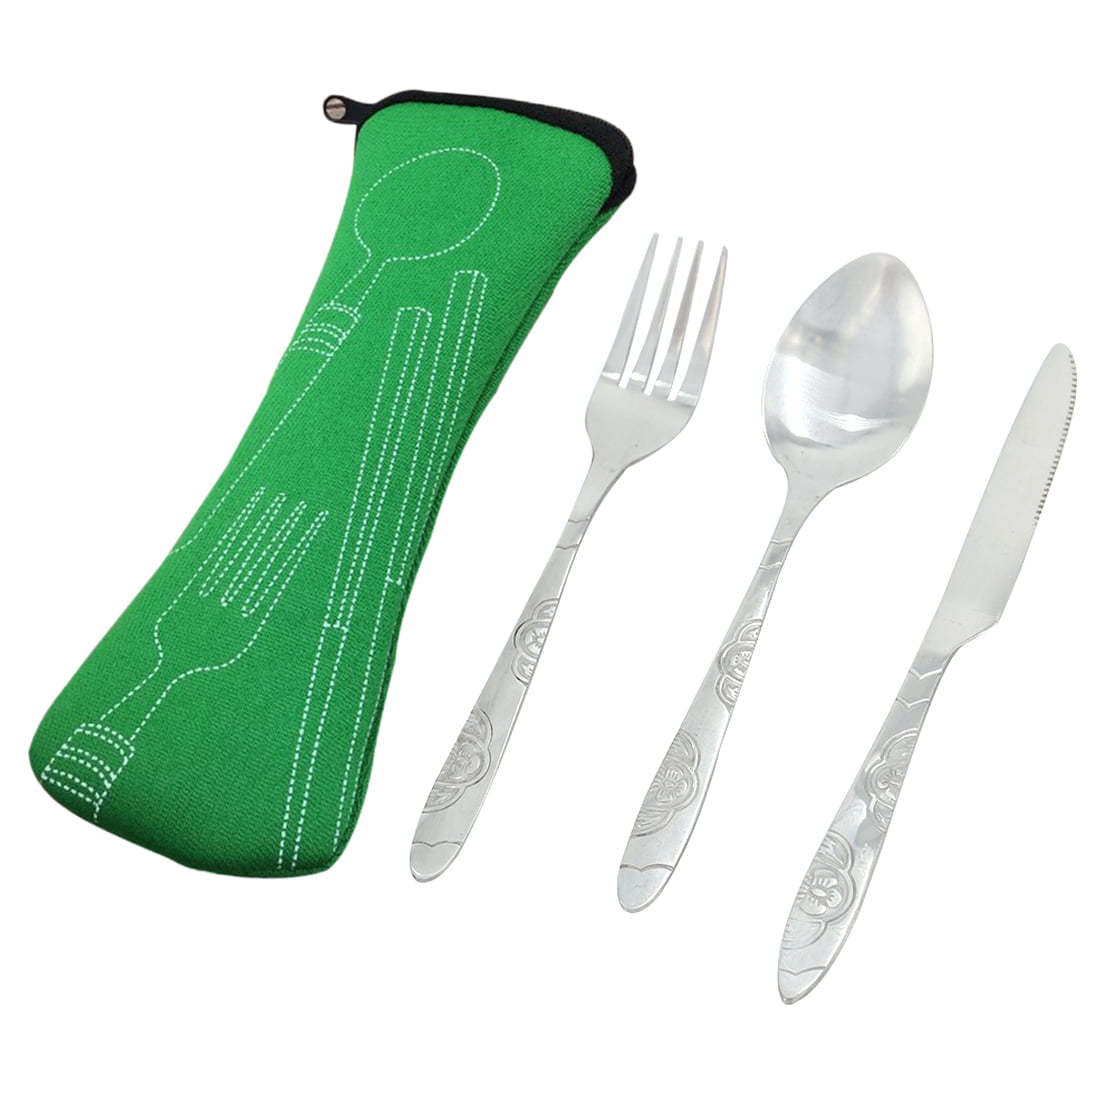 3pcs Portable Stainless Steel Tableware Dinnerware Travel Camp Cutlery With Bag